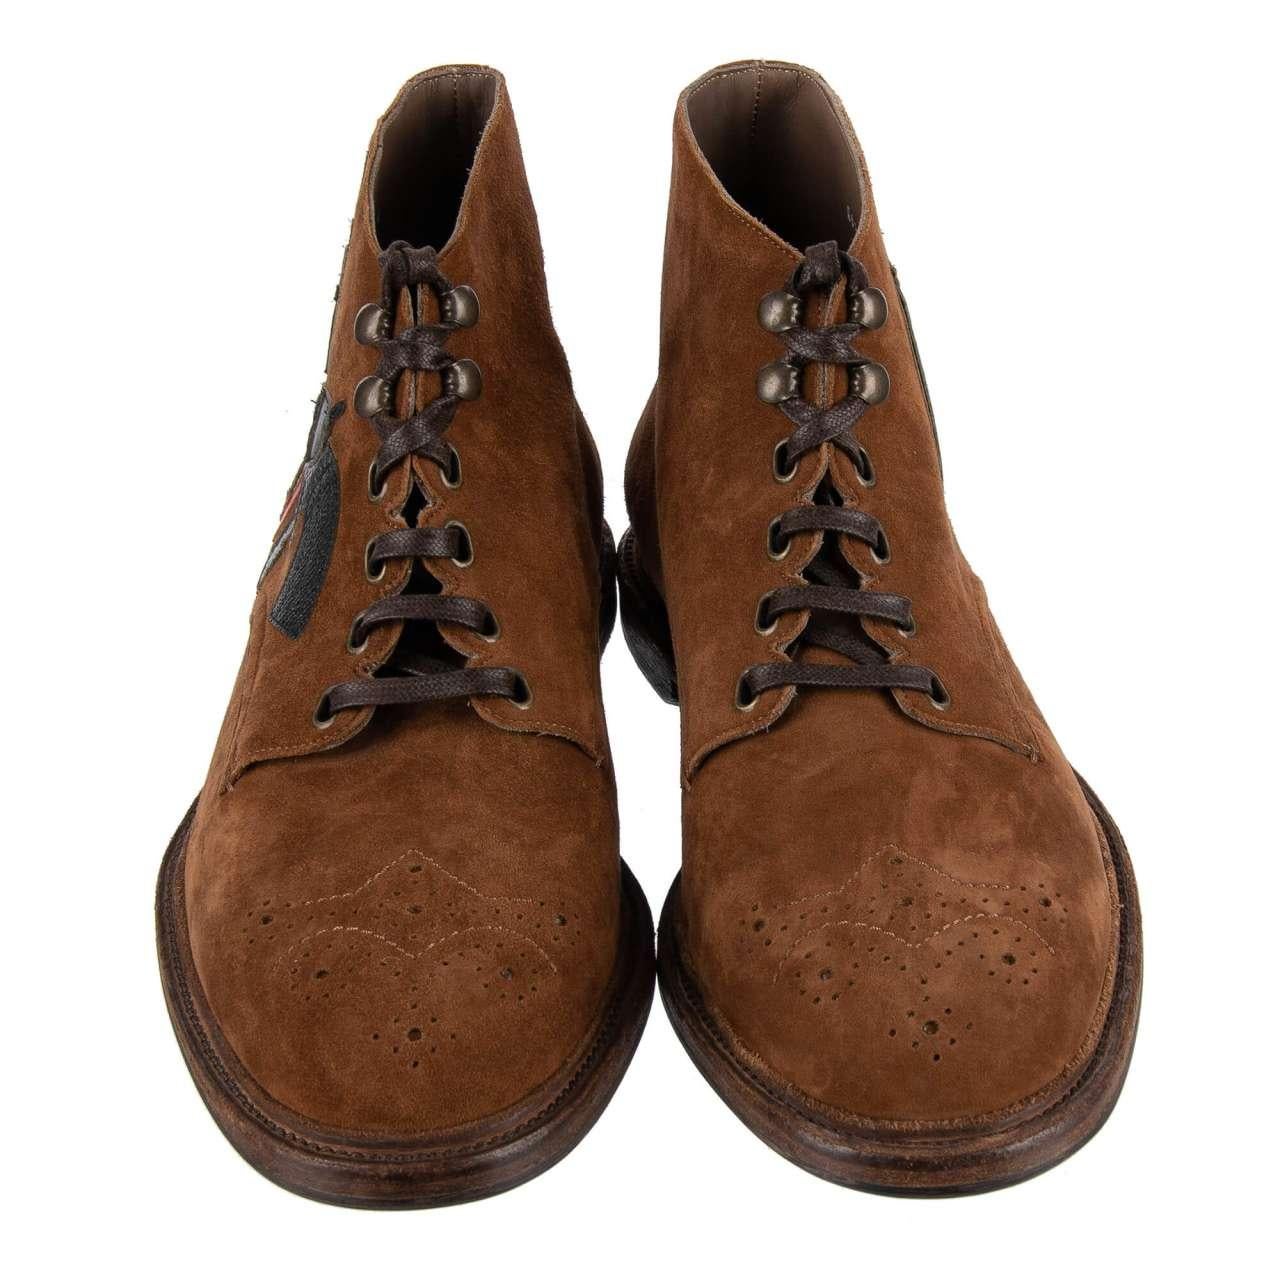 Men's Dolce & Gabbana Suede Brogue Boots with Pistols Embroidery MARSALA Brown EUR 42 For Sale